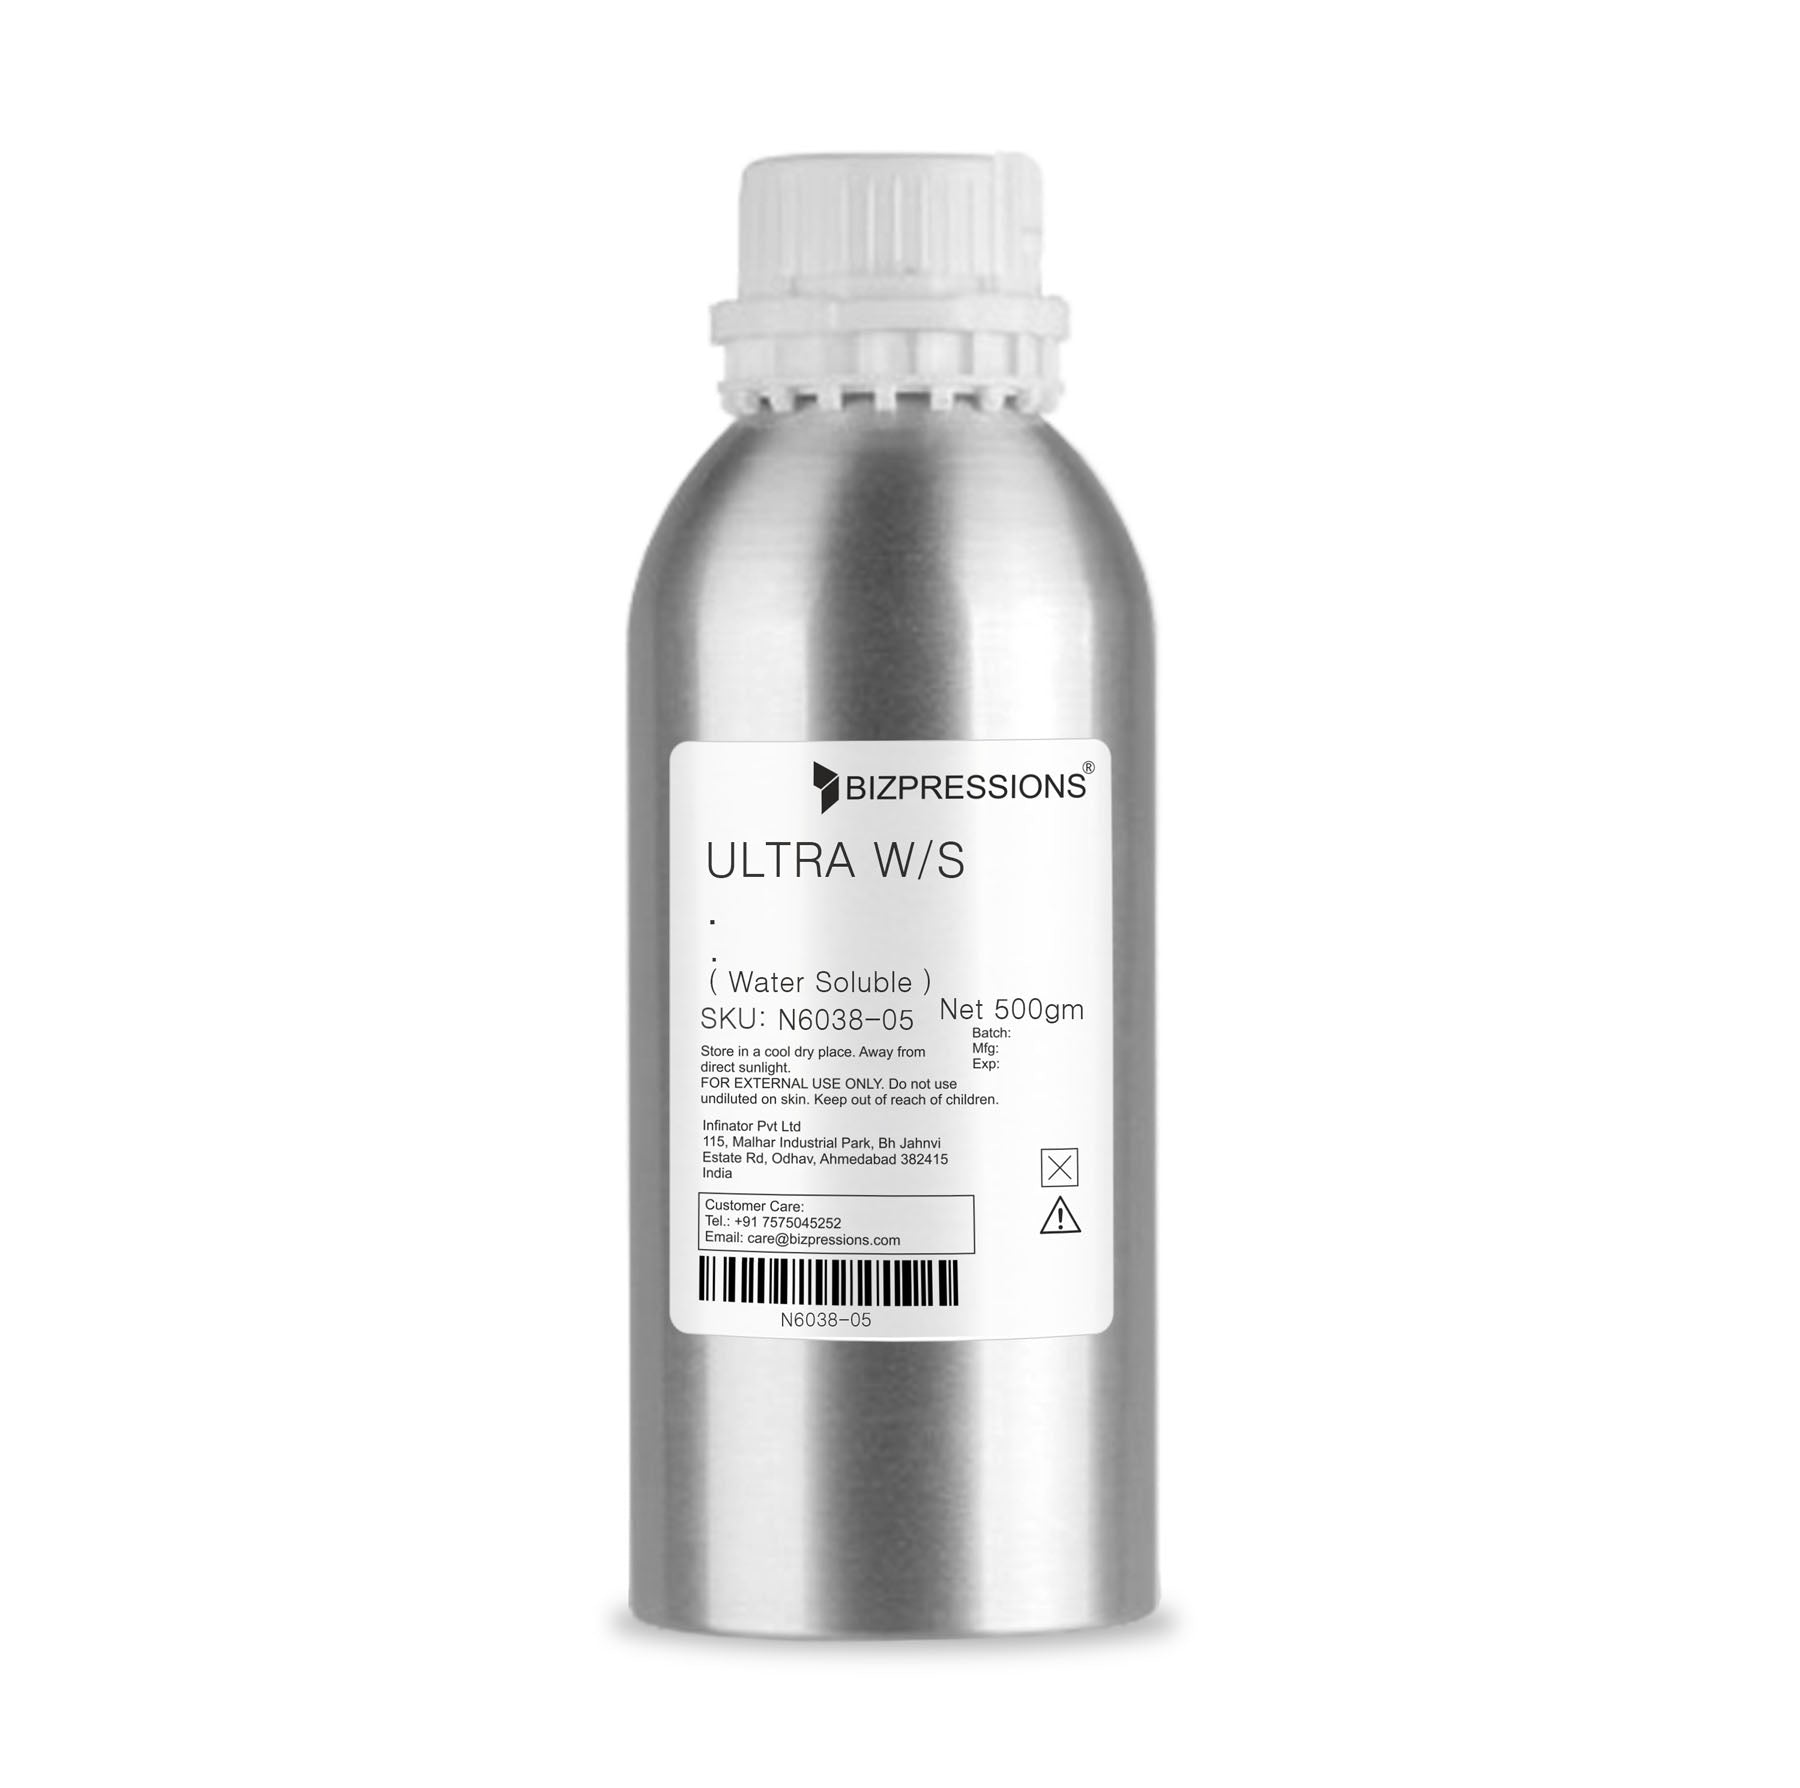 ULTRA W/S - Fragrance ( Water Soluble ) - 500 gm